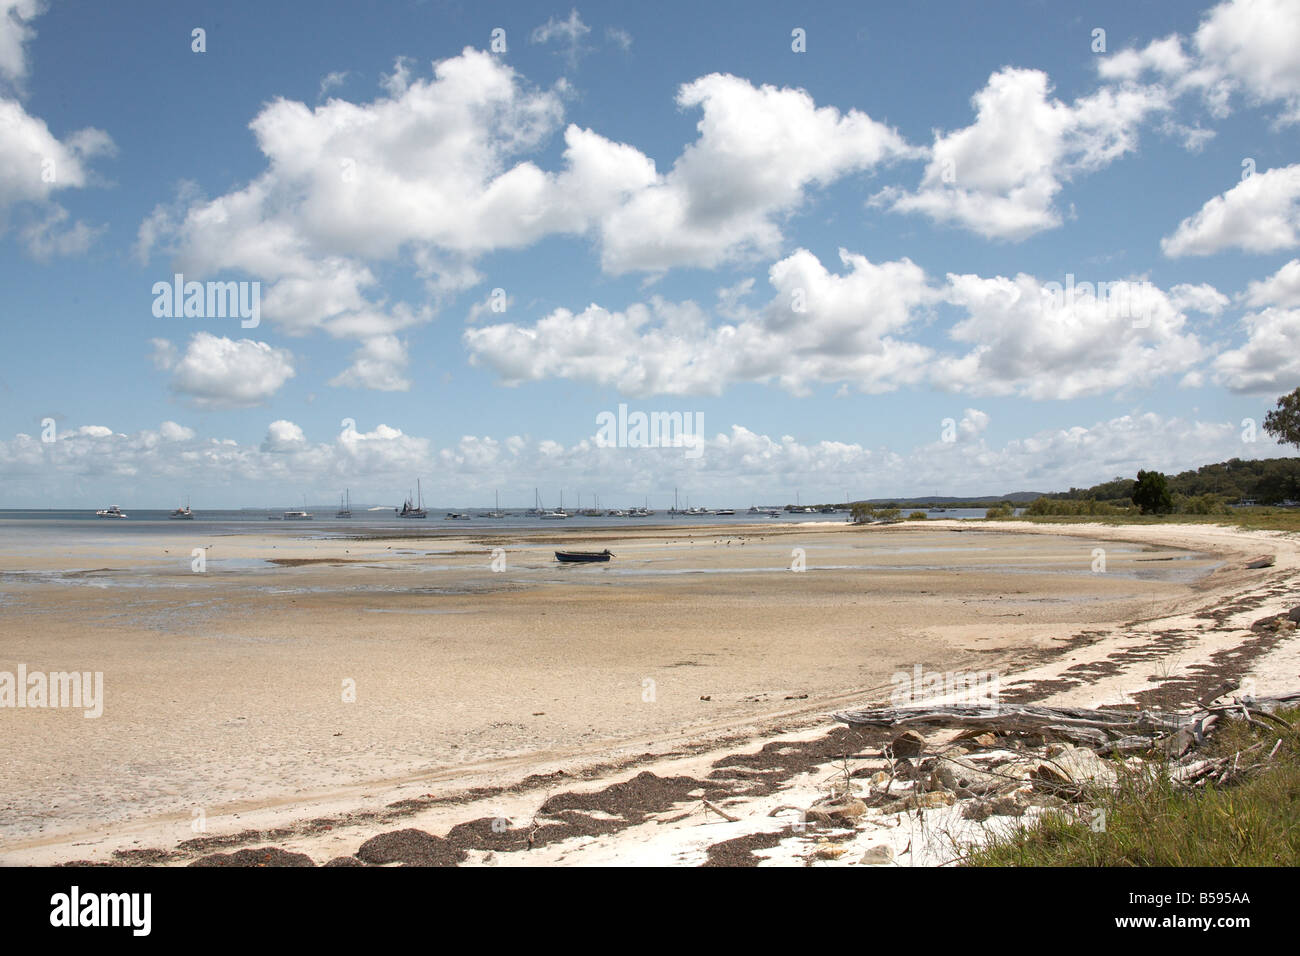 Boats in the sea with beach at low tide near Dunwich on North Stradbrook Island Queensland QLD Australia Stock Photo